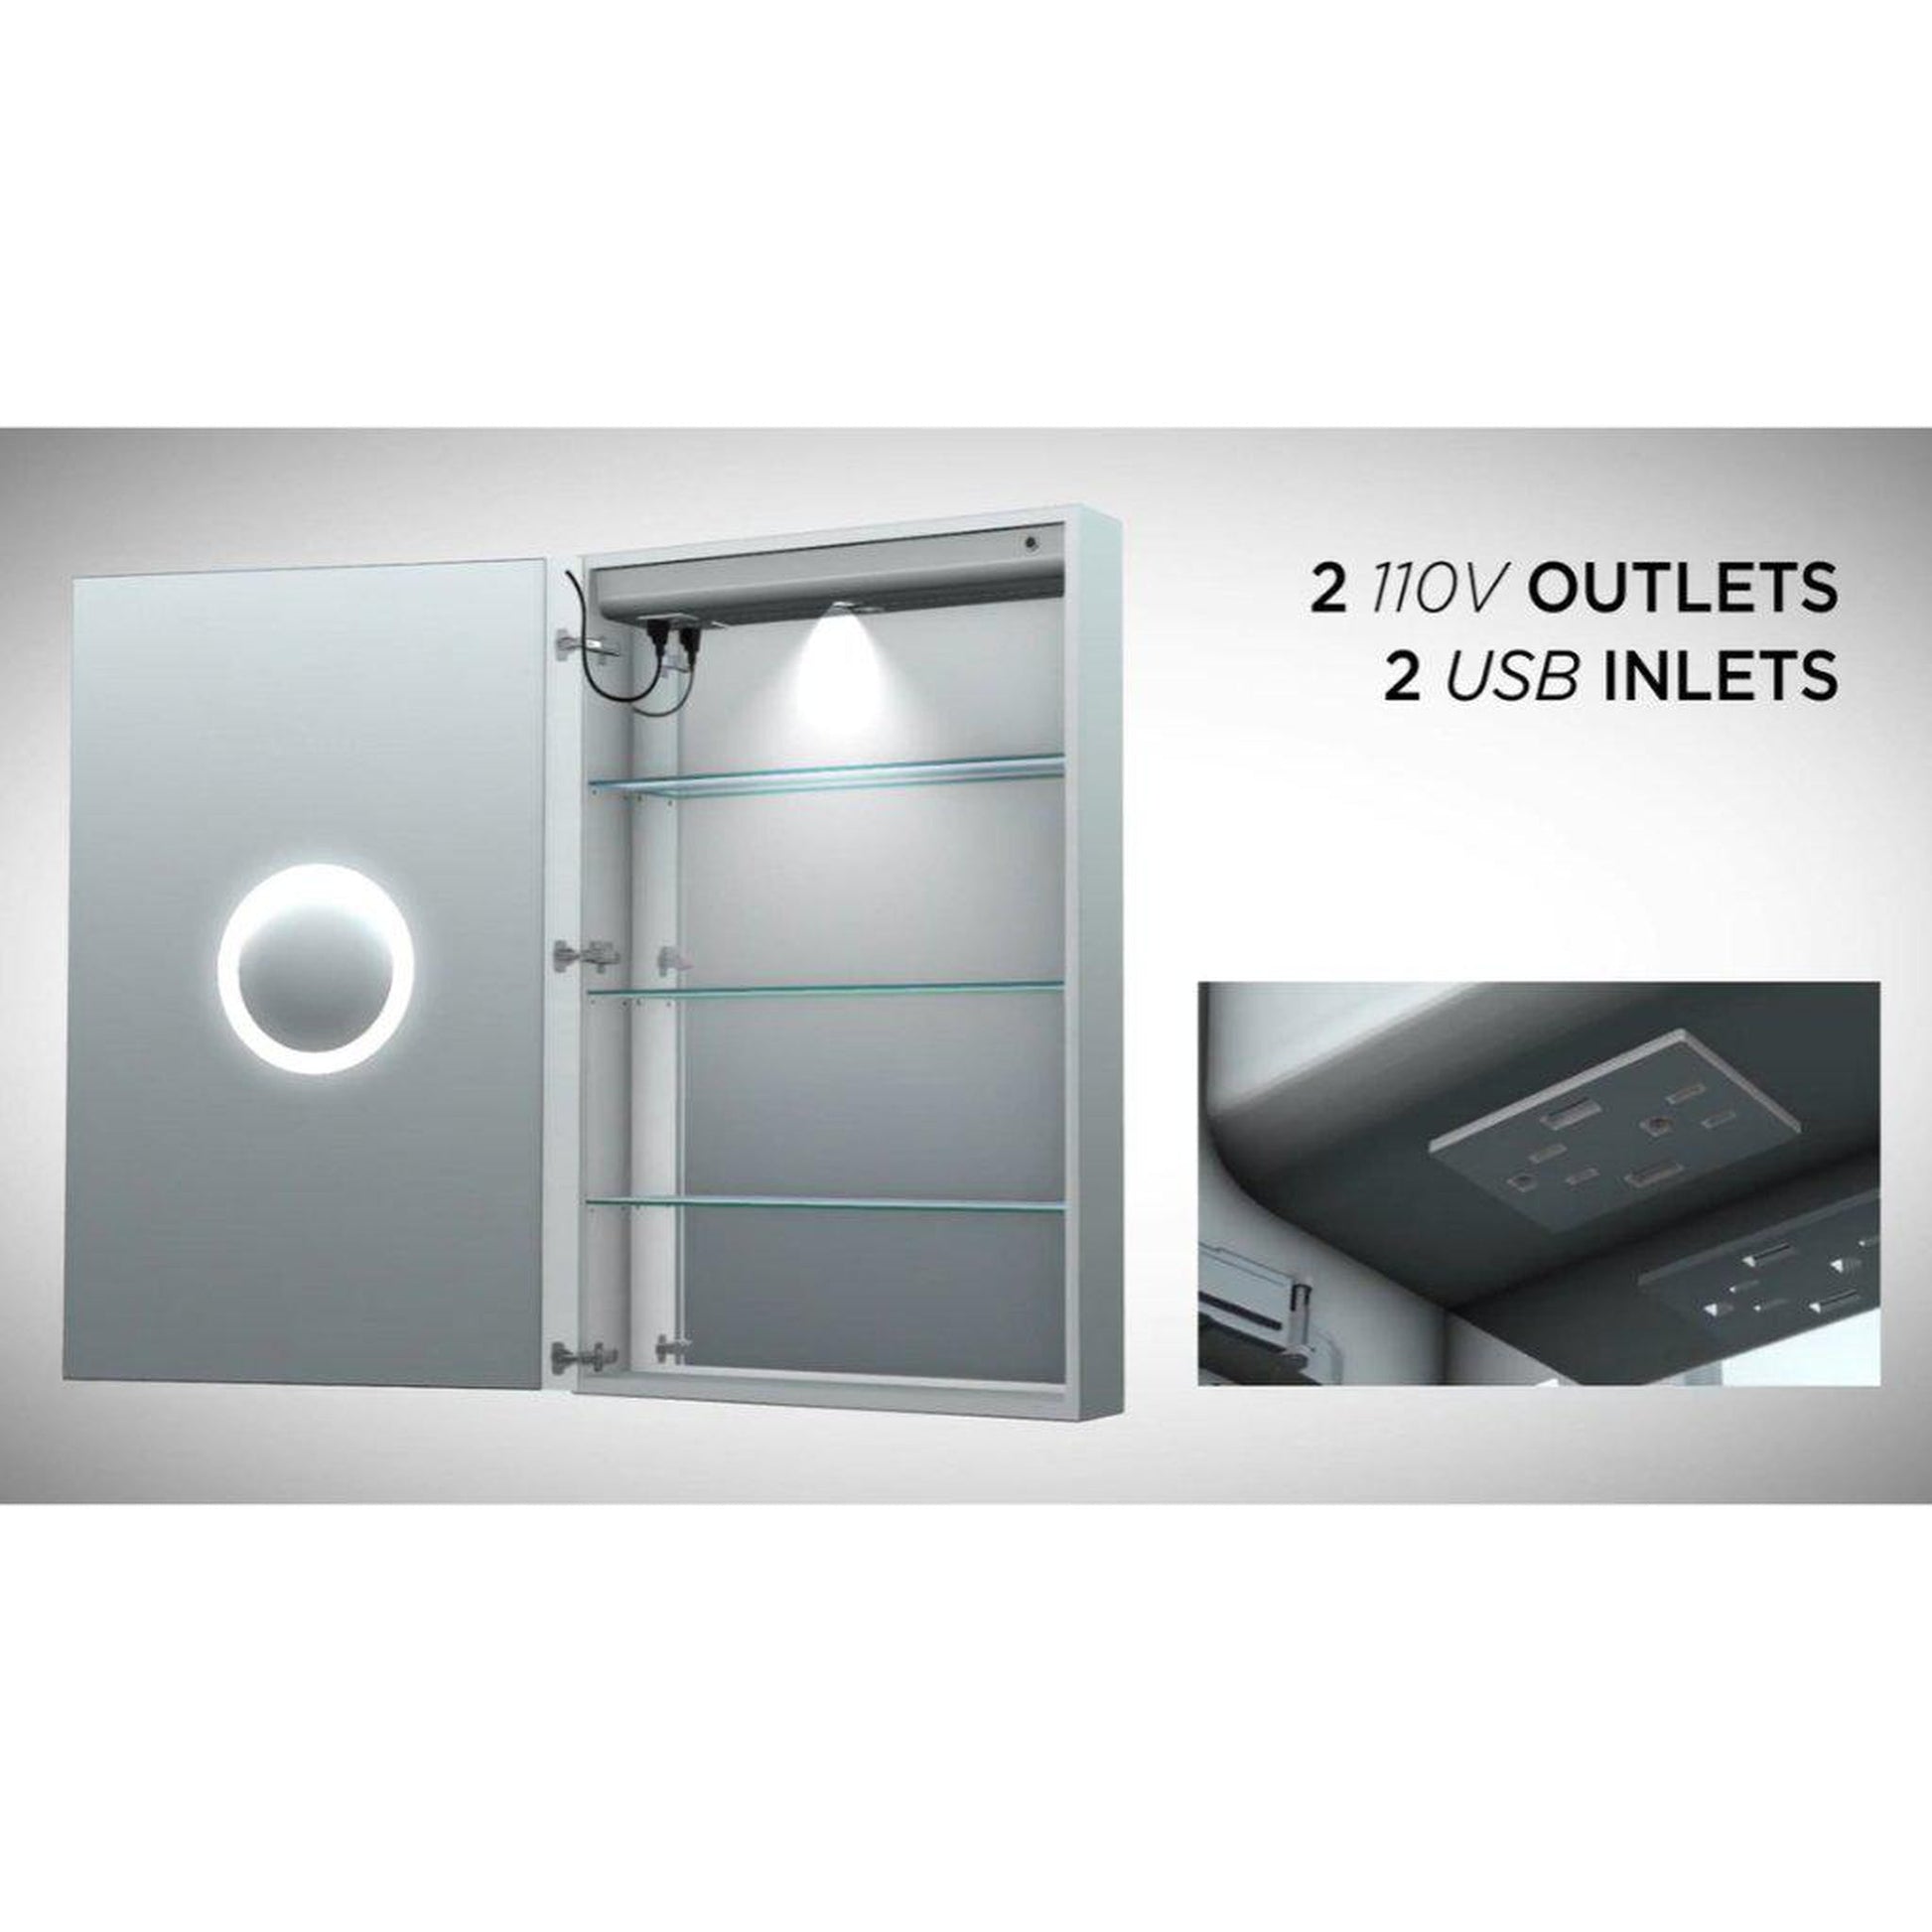 Krugg Reflections Svange 42" x 36" 5000K Single Bi-View Left Opening Recessed/Surface-Mount Illuminated Silver Backed LED Medicine Cabinet Mirror With Built-in Defogger, Dimmer and Electrical Outlet